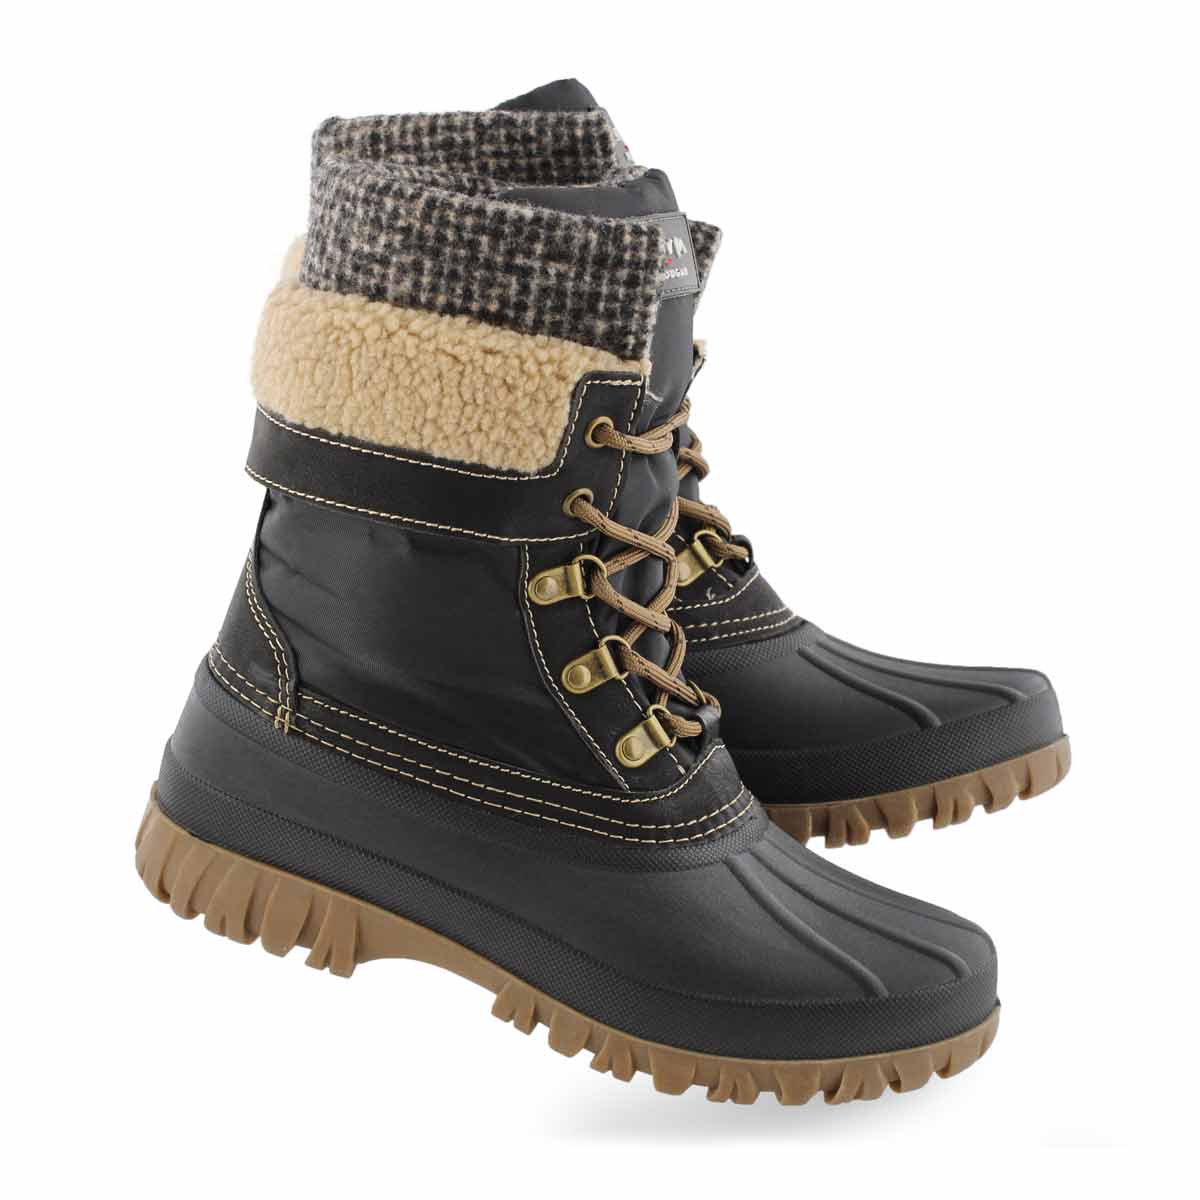 storm by cougar creek boots